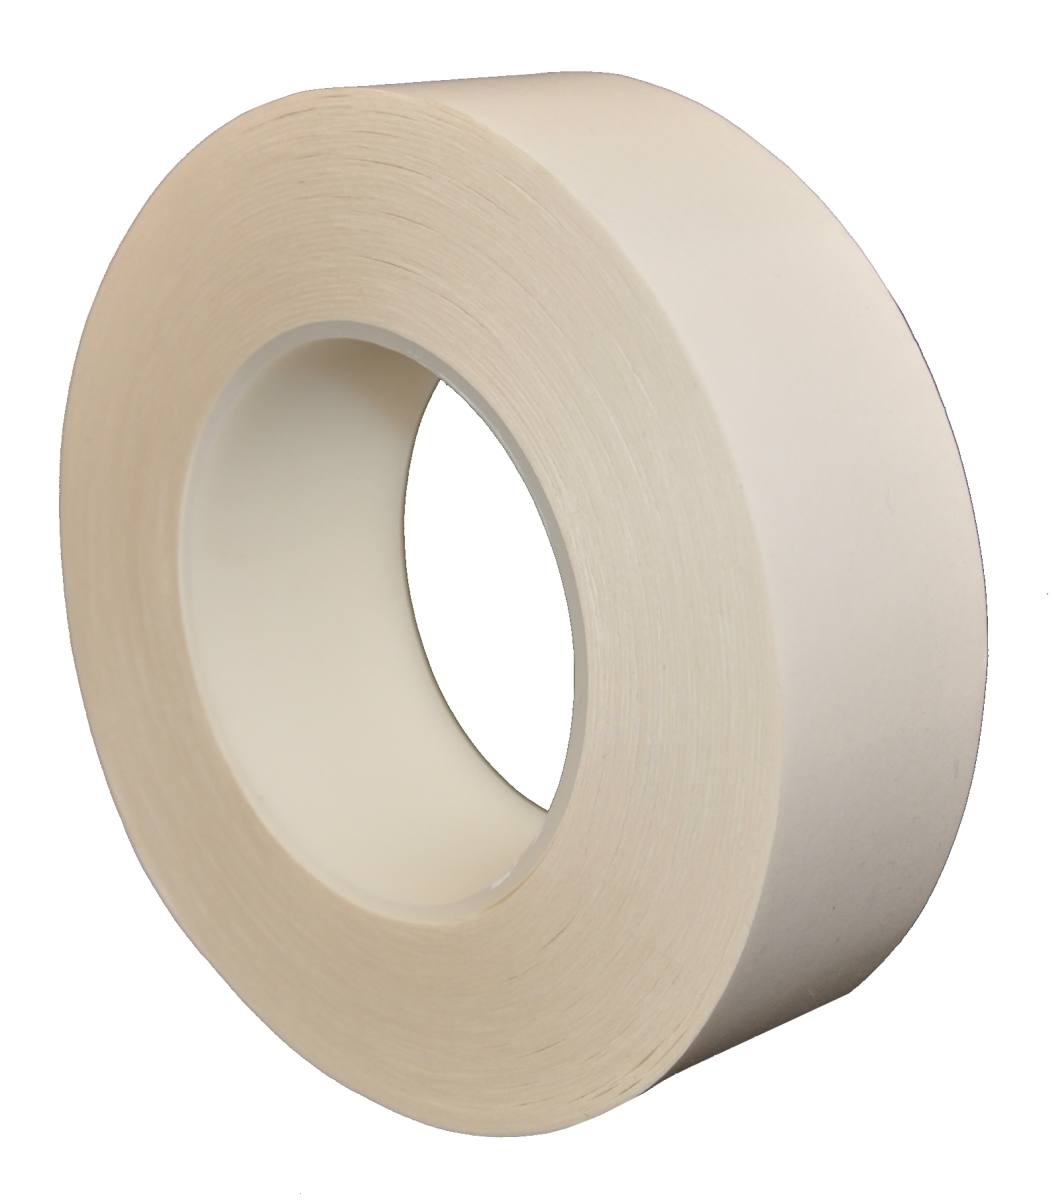 SKS silicone paper release liner, 250mmx150m, coated with glassine on both sides, white